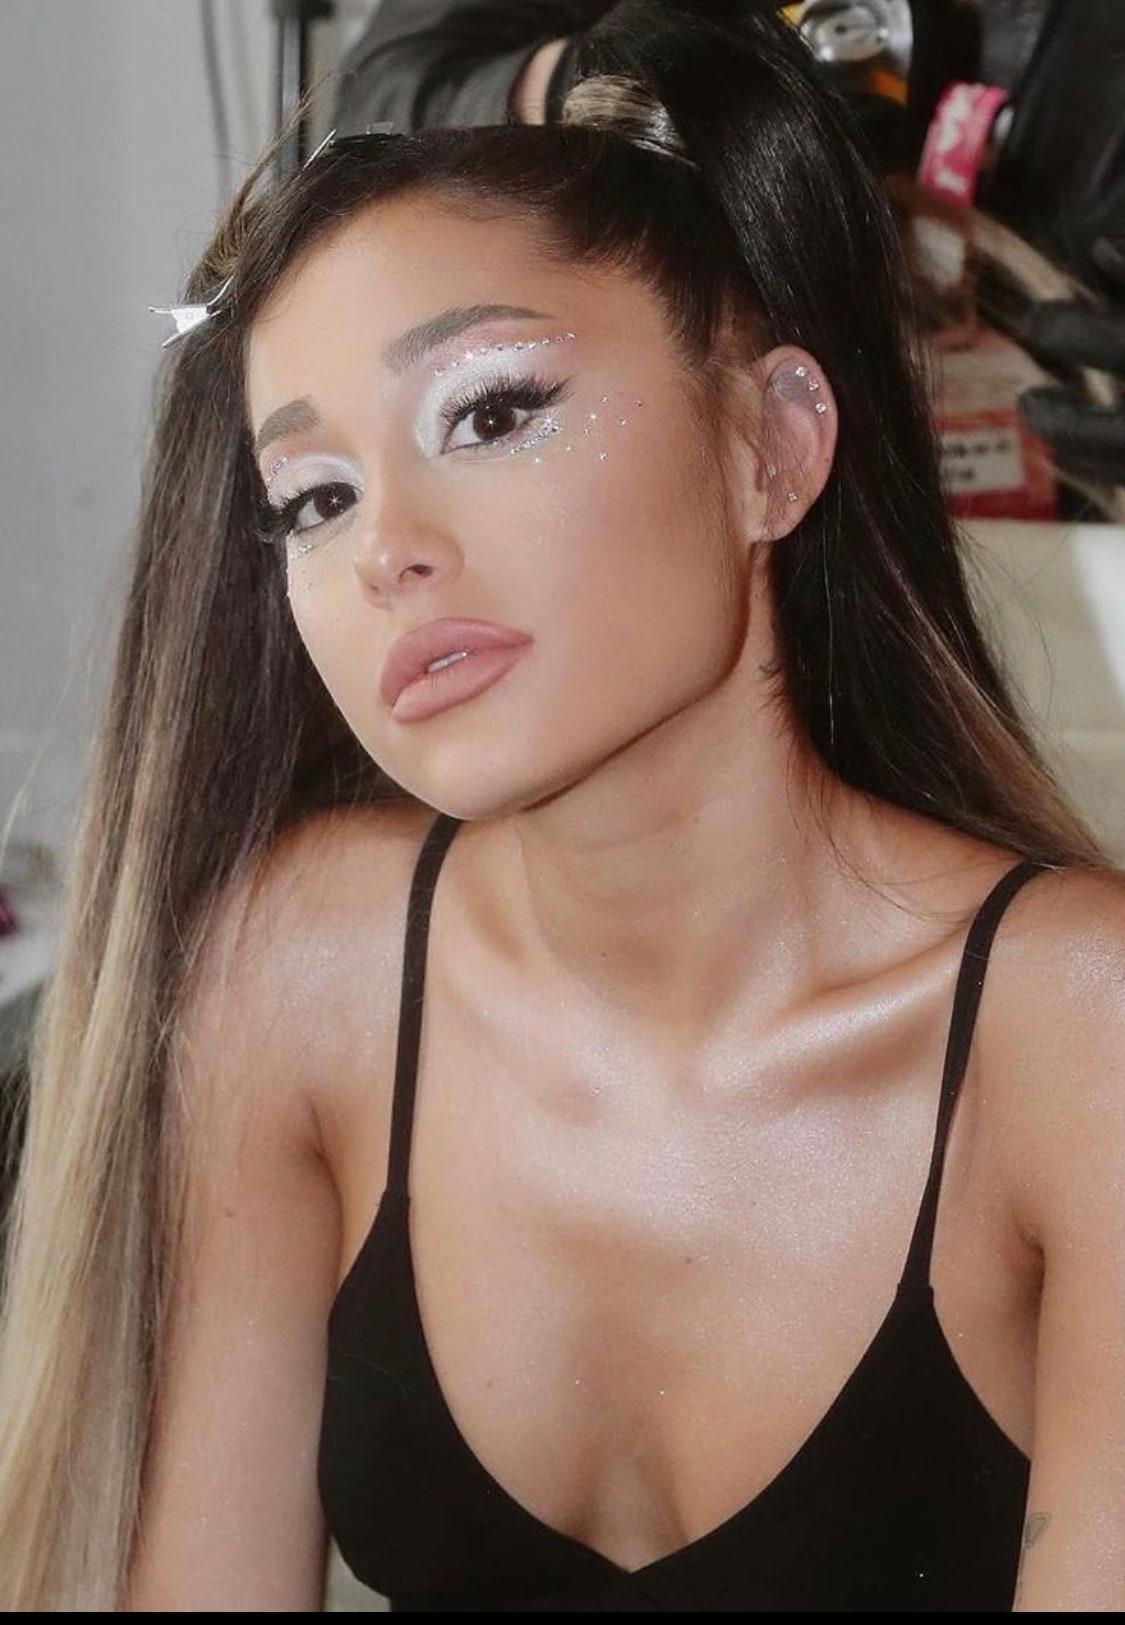 We talked to Michael Anthony, Ariana Grande's head makeup artist